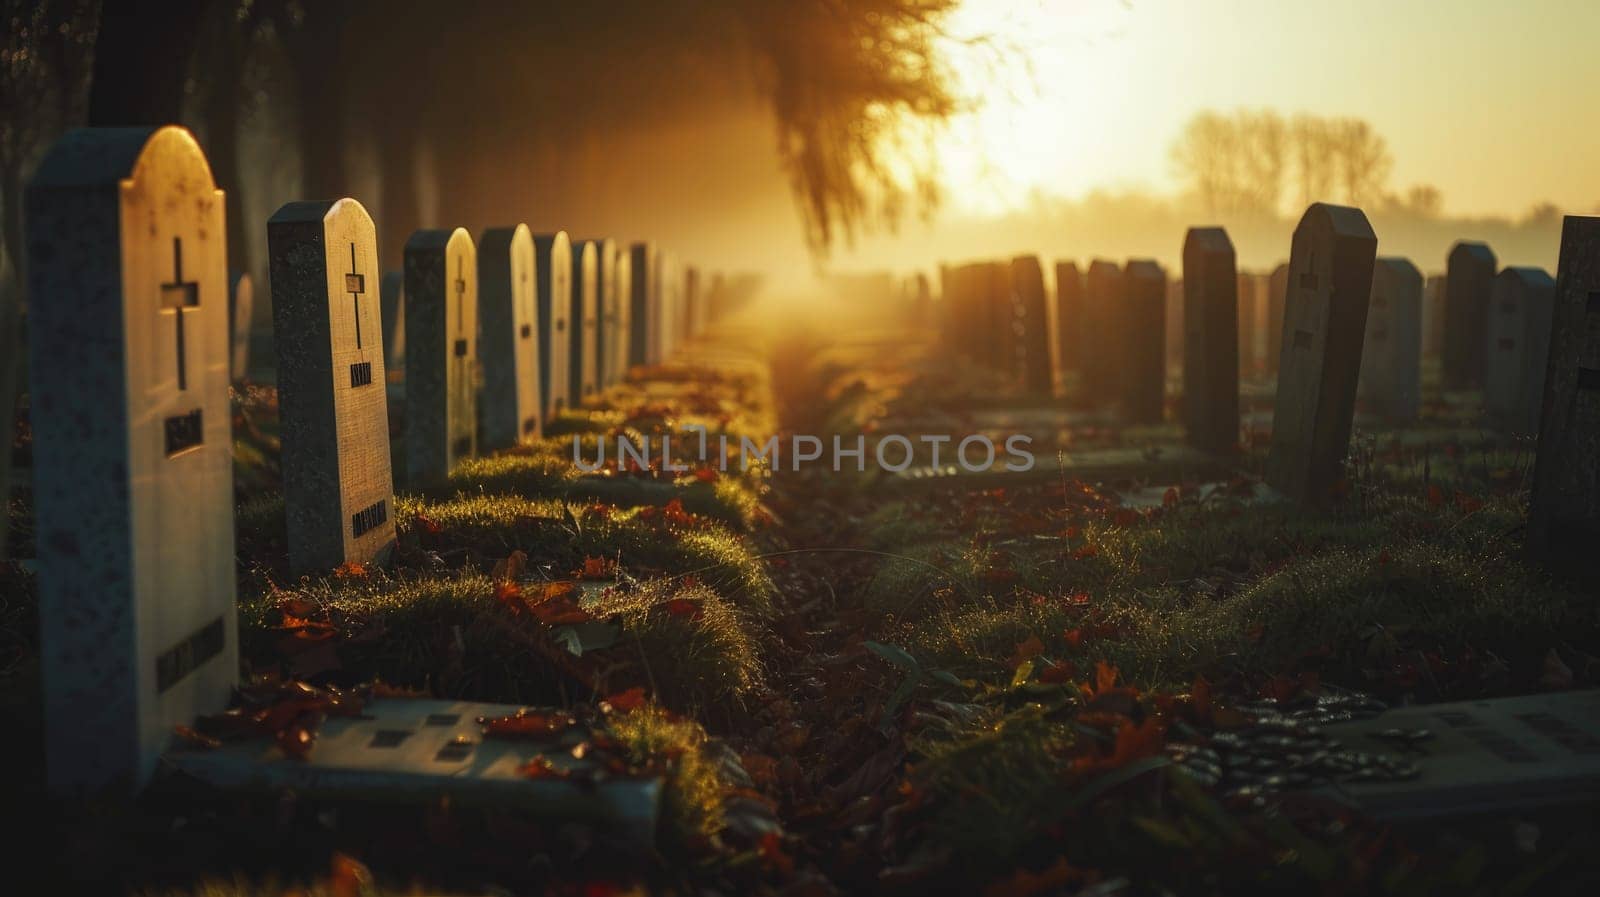 A military cemetery with rows of solemn gravestones, Concept of the legacy of those lost in war.